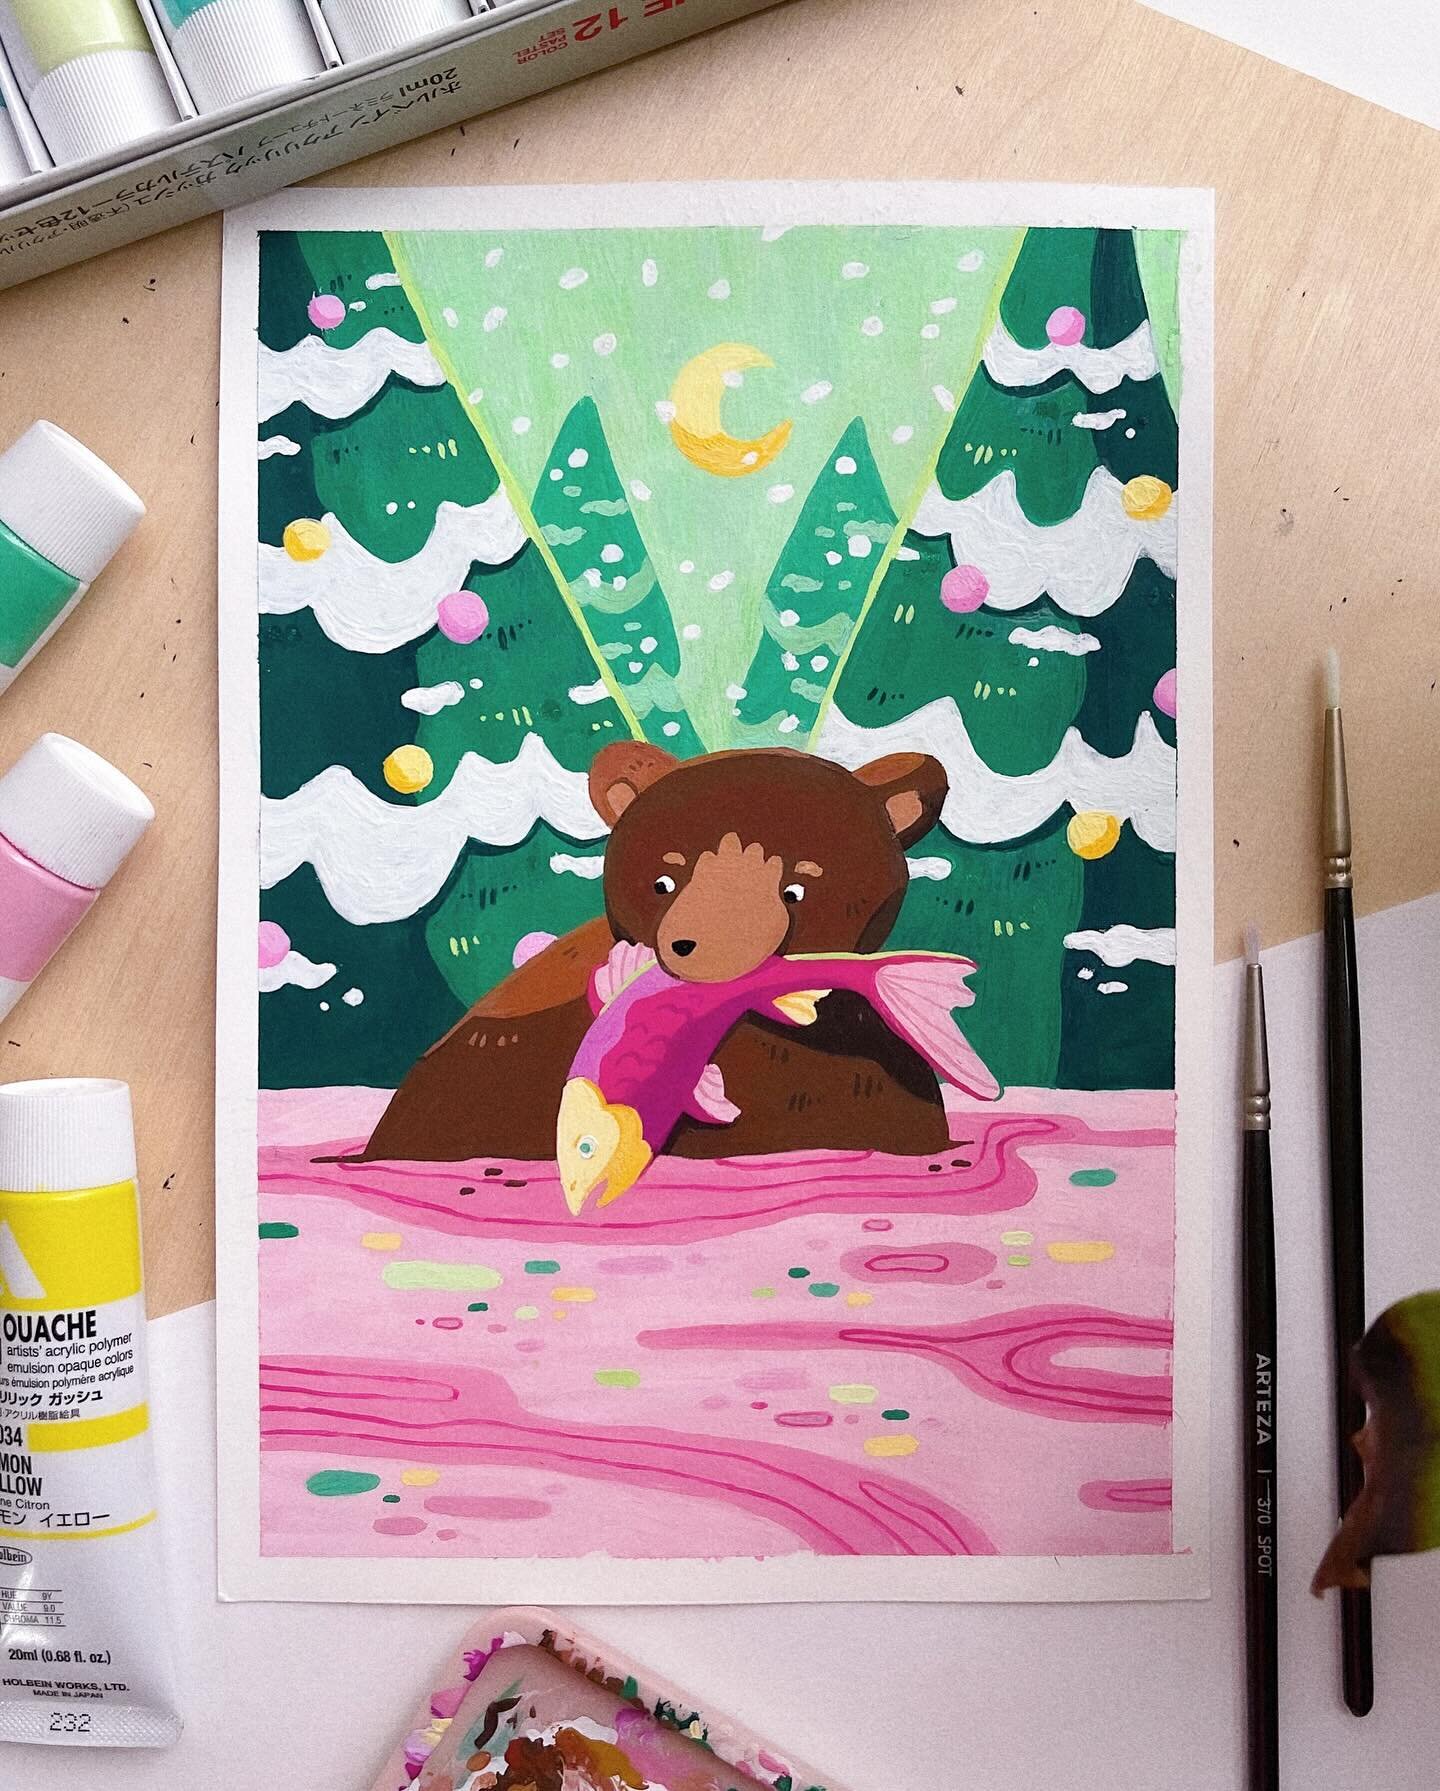 &lsquo;Bear and Salmon&rsquo; - something I painted in December and forgot to share before - painted with Acrylic Gouache paints which was my first time using them 🌝 

#bearillustration #bearandsalmon #bears #brownbearillustration #childrenillustrat